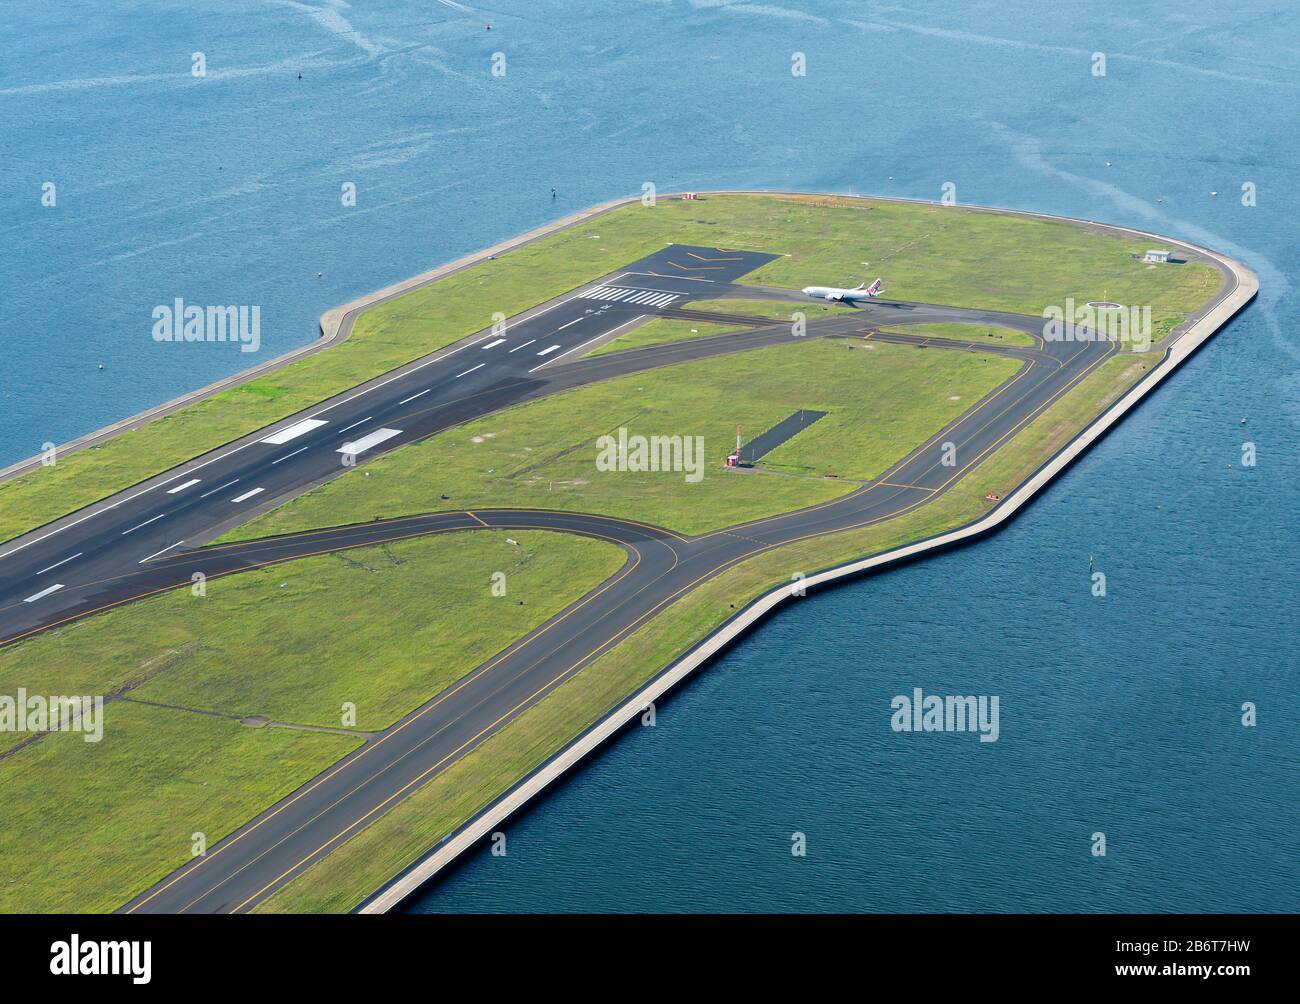 Airport runway built in reclaimed land at Sydney Kingsford Smith International Airport (SYD / YSSY), NSW, Australia. Aircraft taxiing. Stock Photo